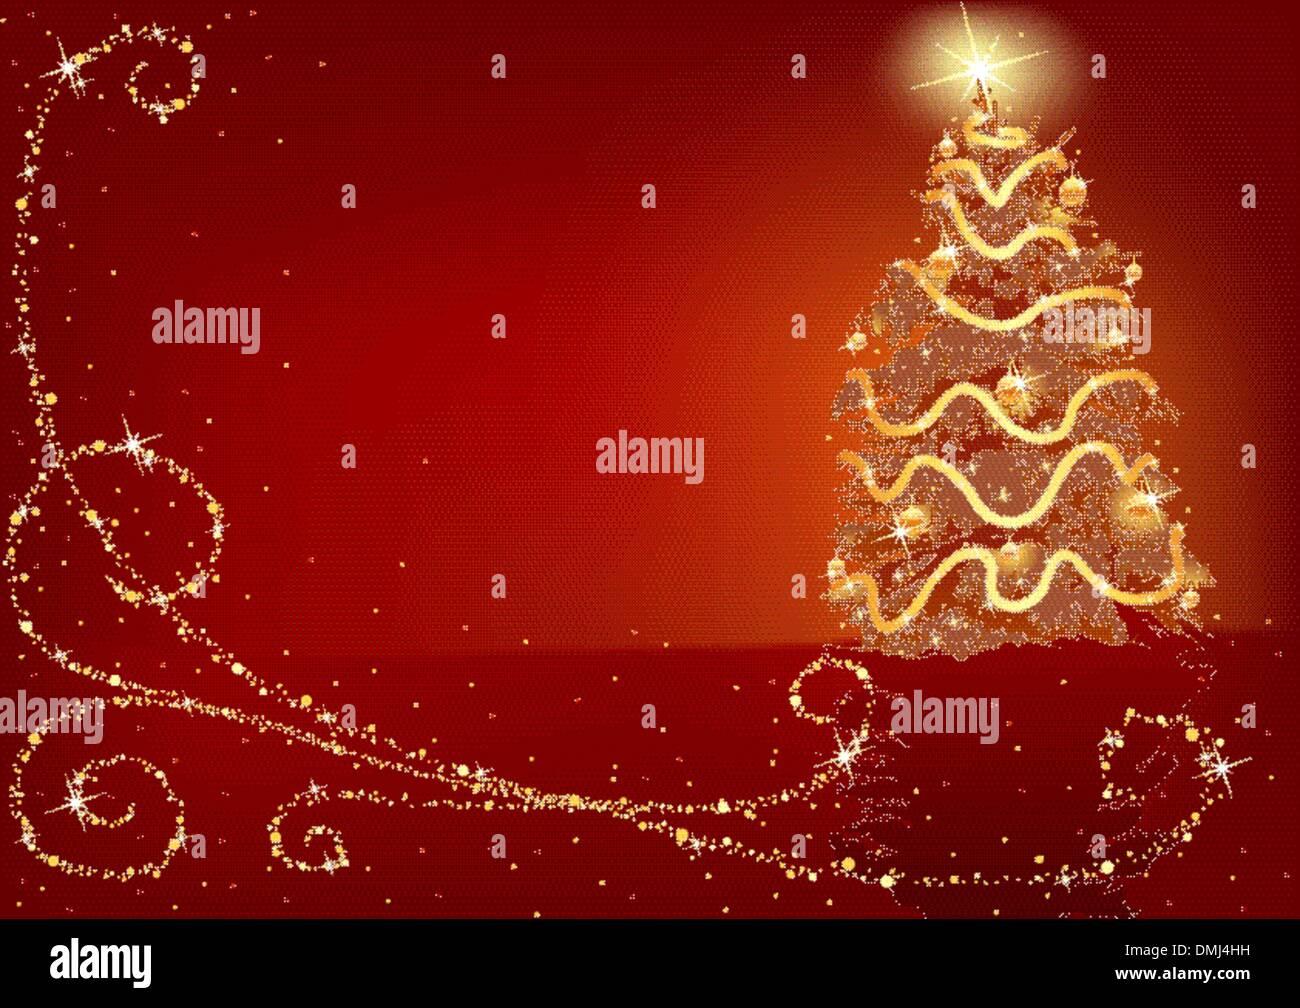 Red Christmas Tree Stock Vector